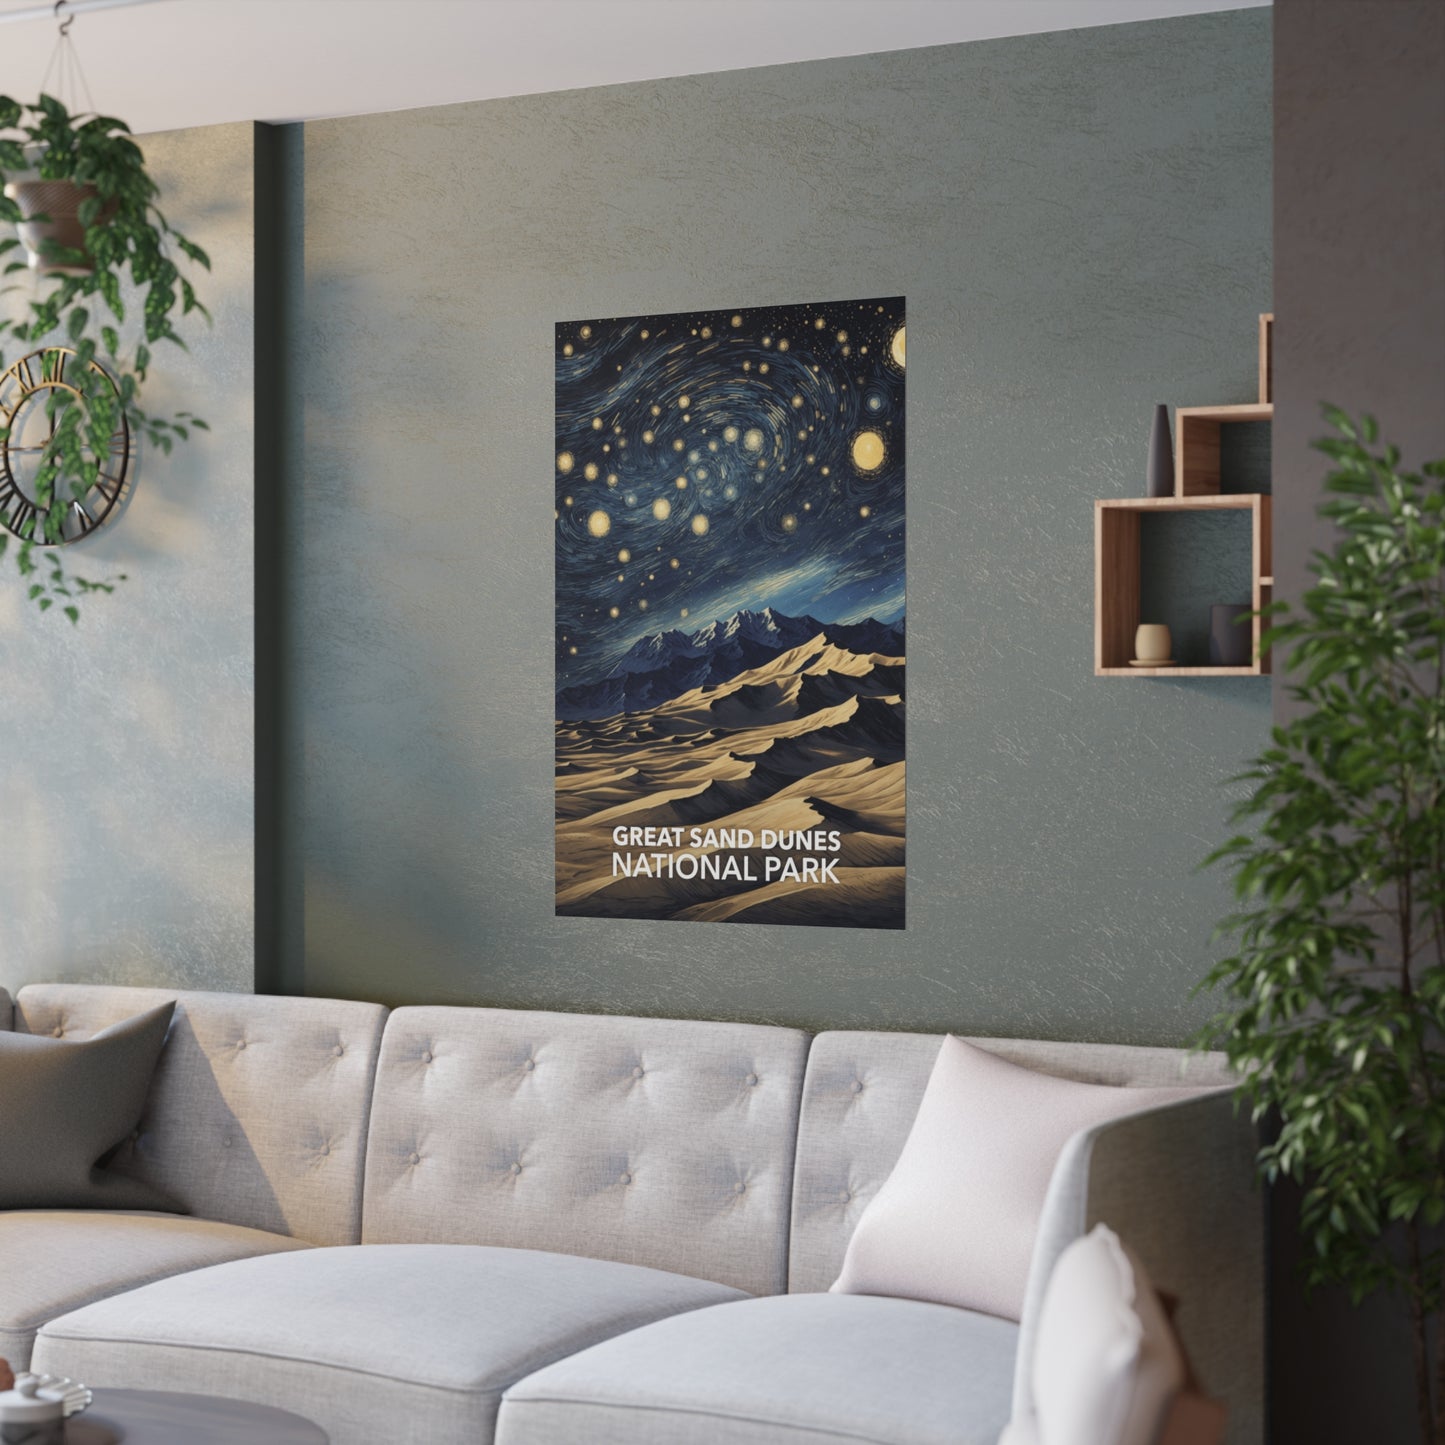 Great Sand Dunes National Park Poster - Starry Night